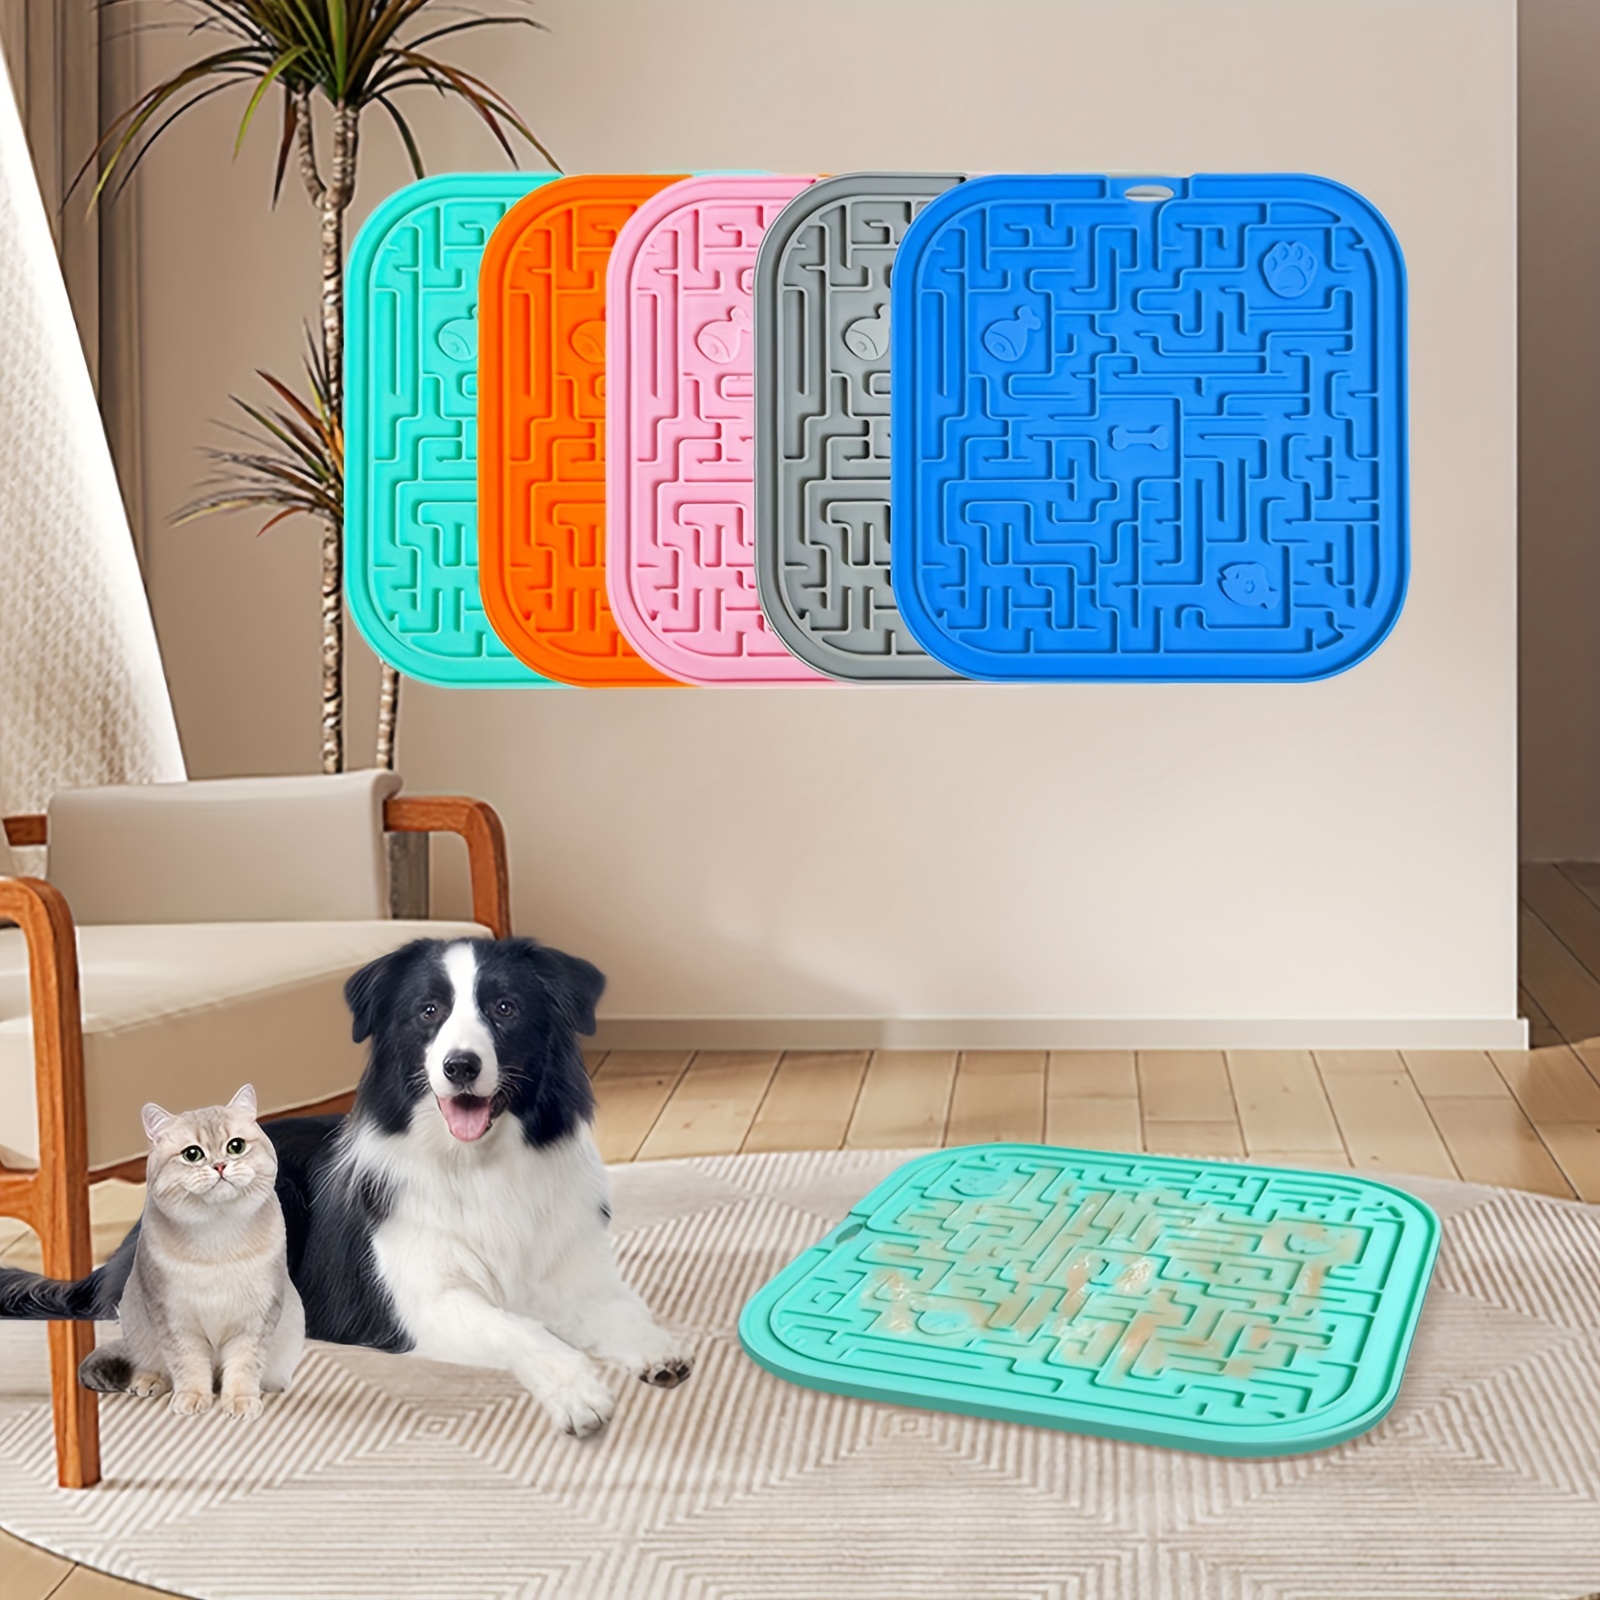  Lick Mat for Dogs Slow Feeder Licking Mat Anxiety Relief Lick  Pad with Suction Cups for Peanut Butter Food Treats Yogurt, Pets Bathing  Grooming Training Calming Mat - 2 Pack 